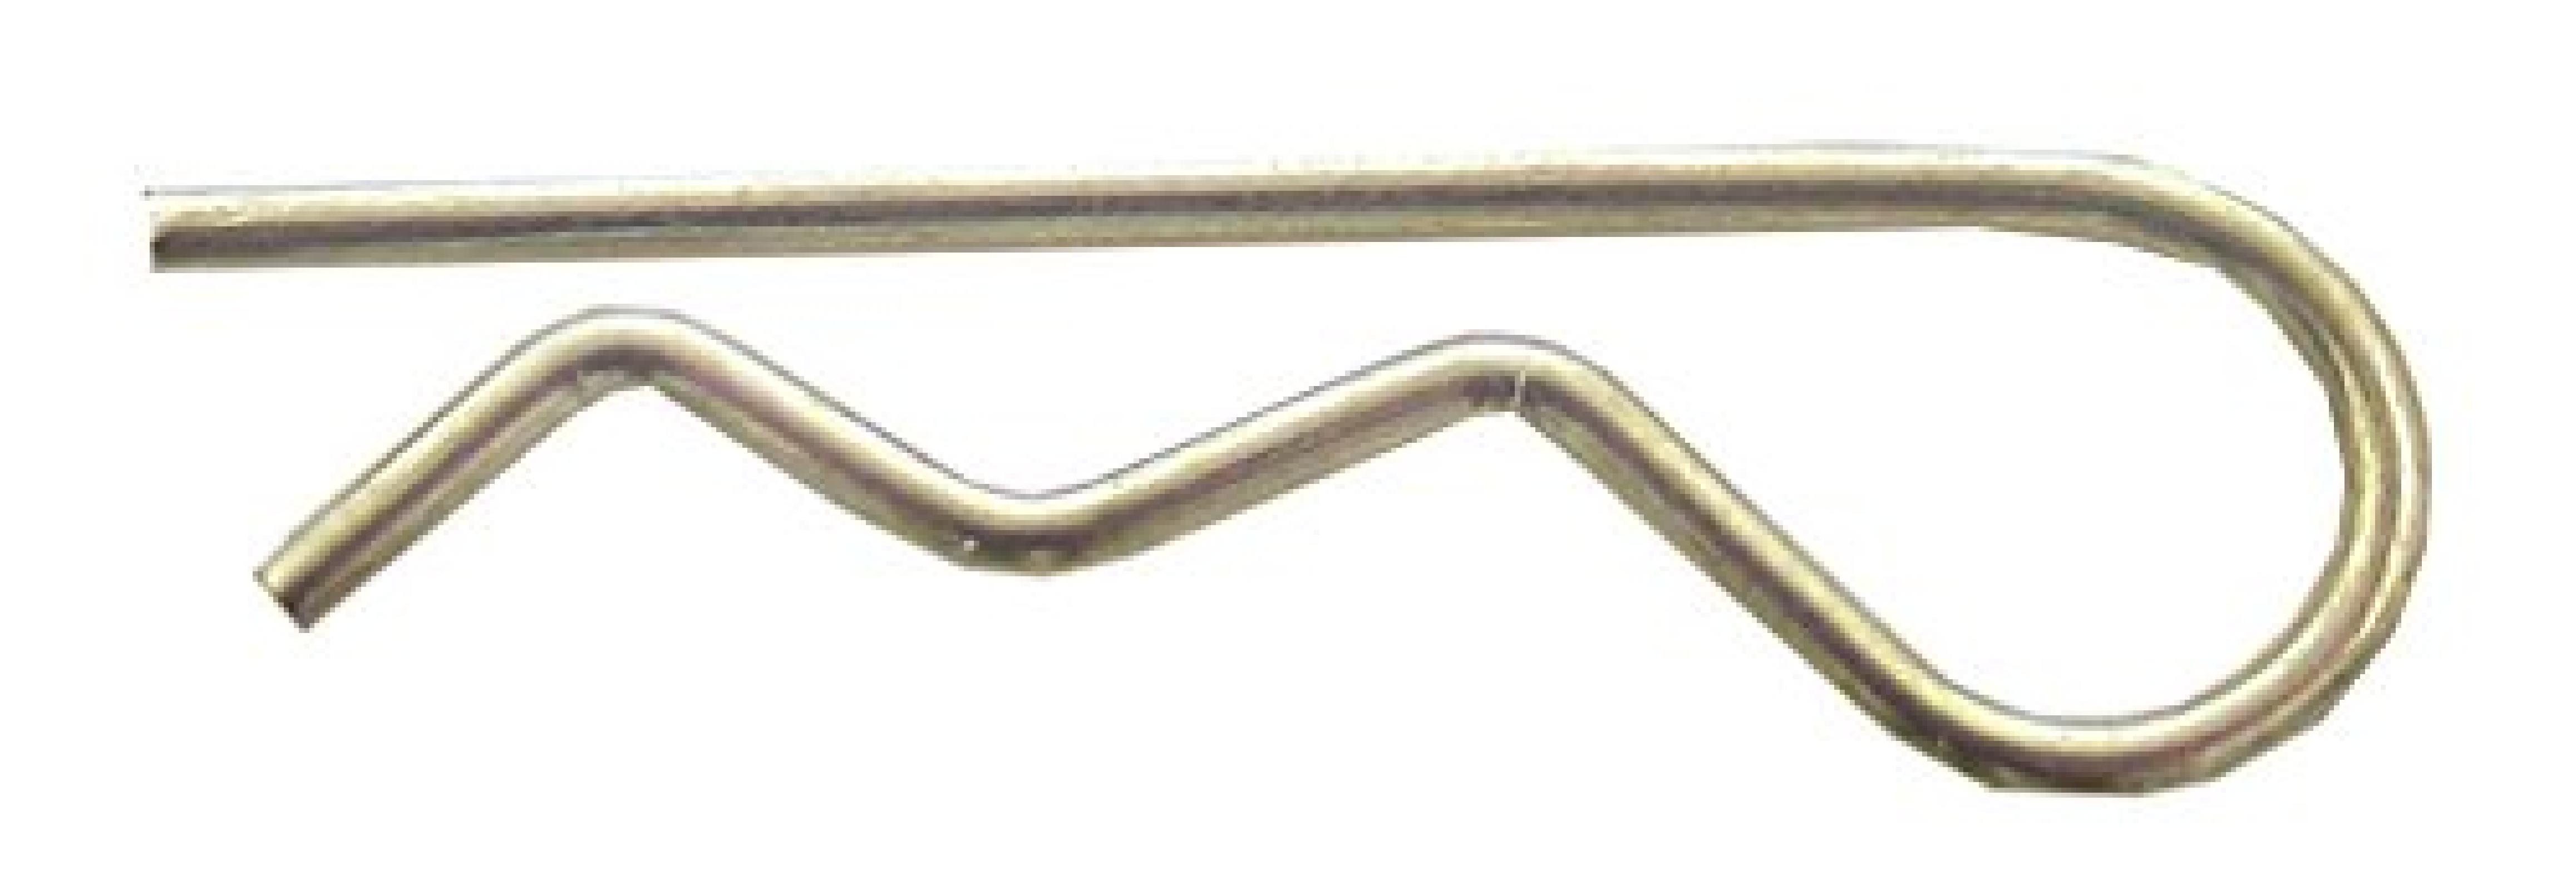 HAIR PIN CLIP .148 X 2 15 part# 02-411 by Oregon - Click Image to Close